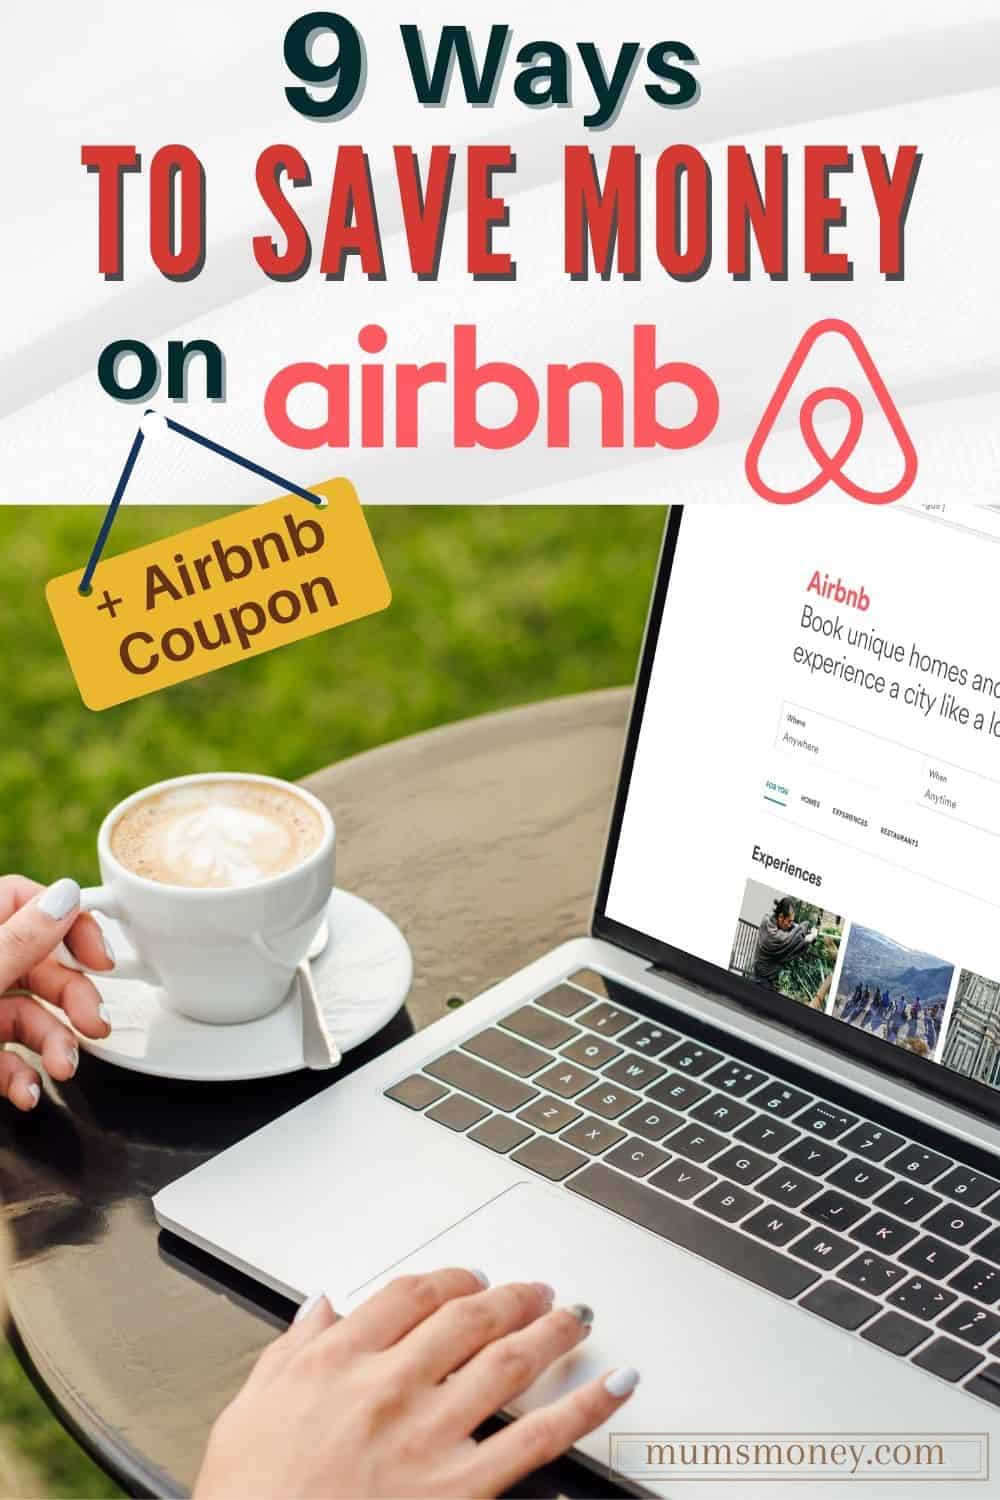 Image showing a laptop on a table, and a cup of coffee with text ovelay that reads 9 Ways to Save Money on Airbnb